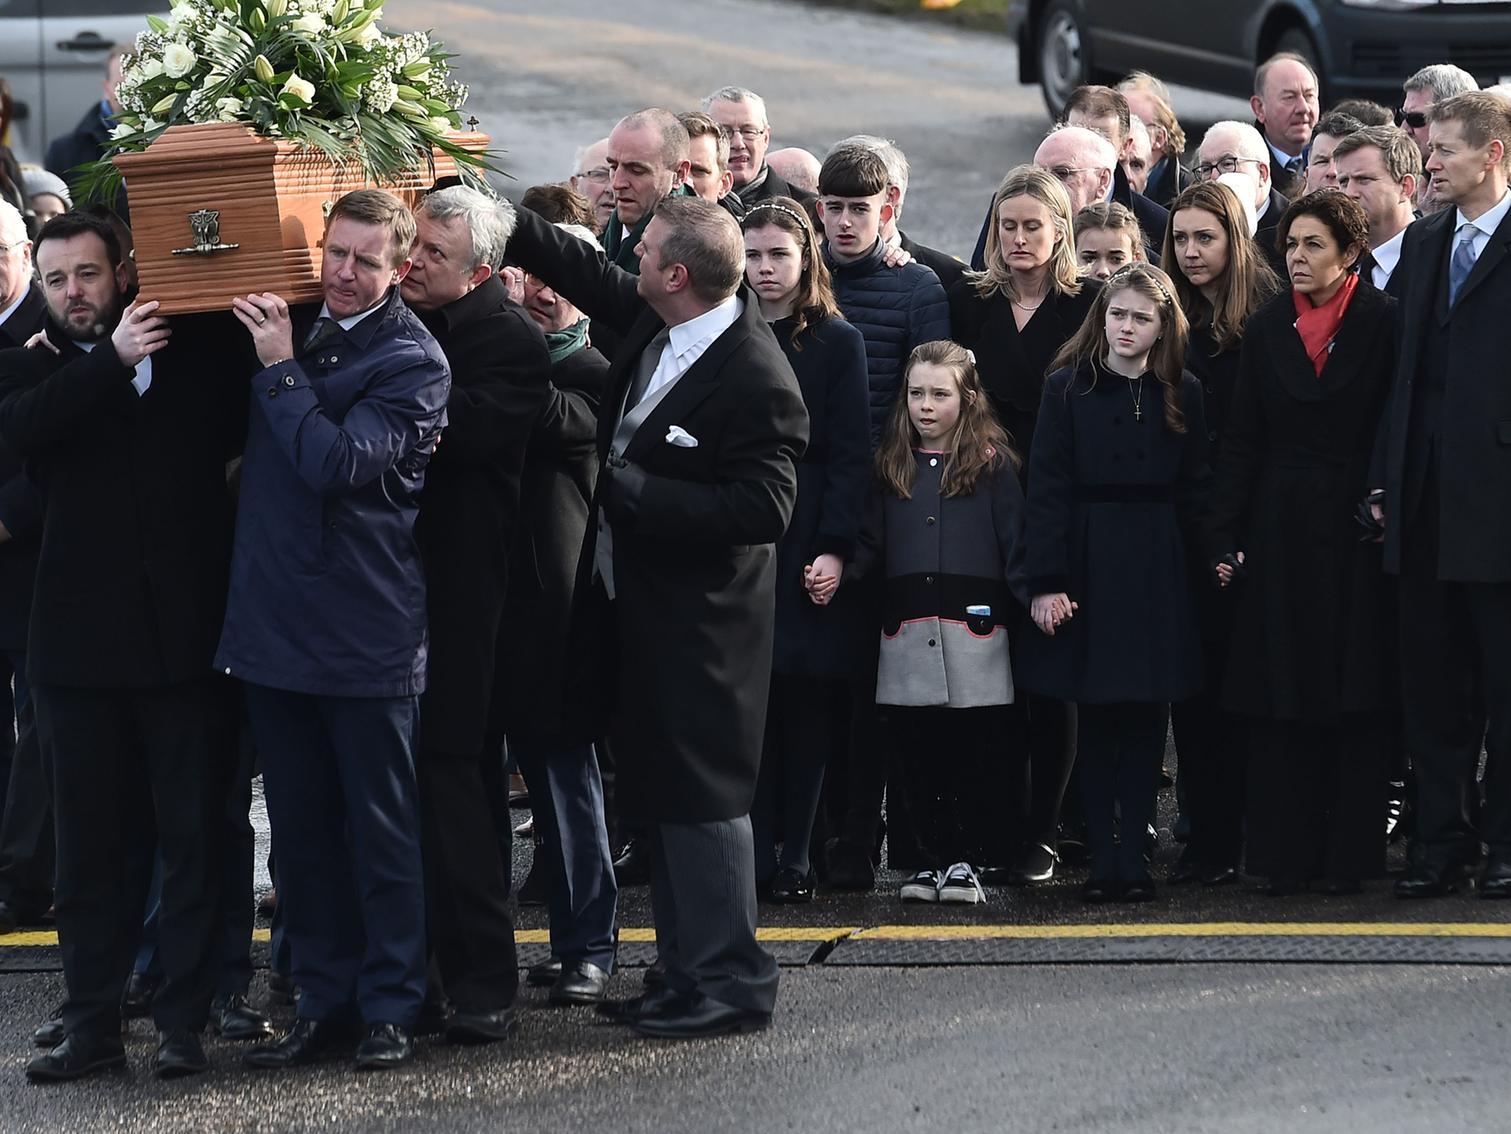 Described as a "great chieftain", former SDLP Deputy Leader, Seamus Mallon, is carried to his final resting place.